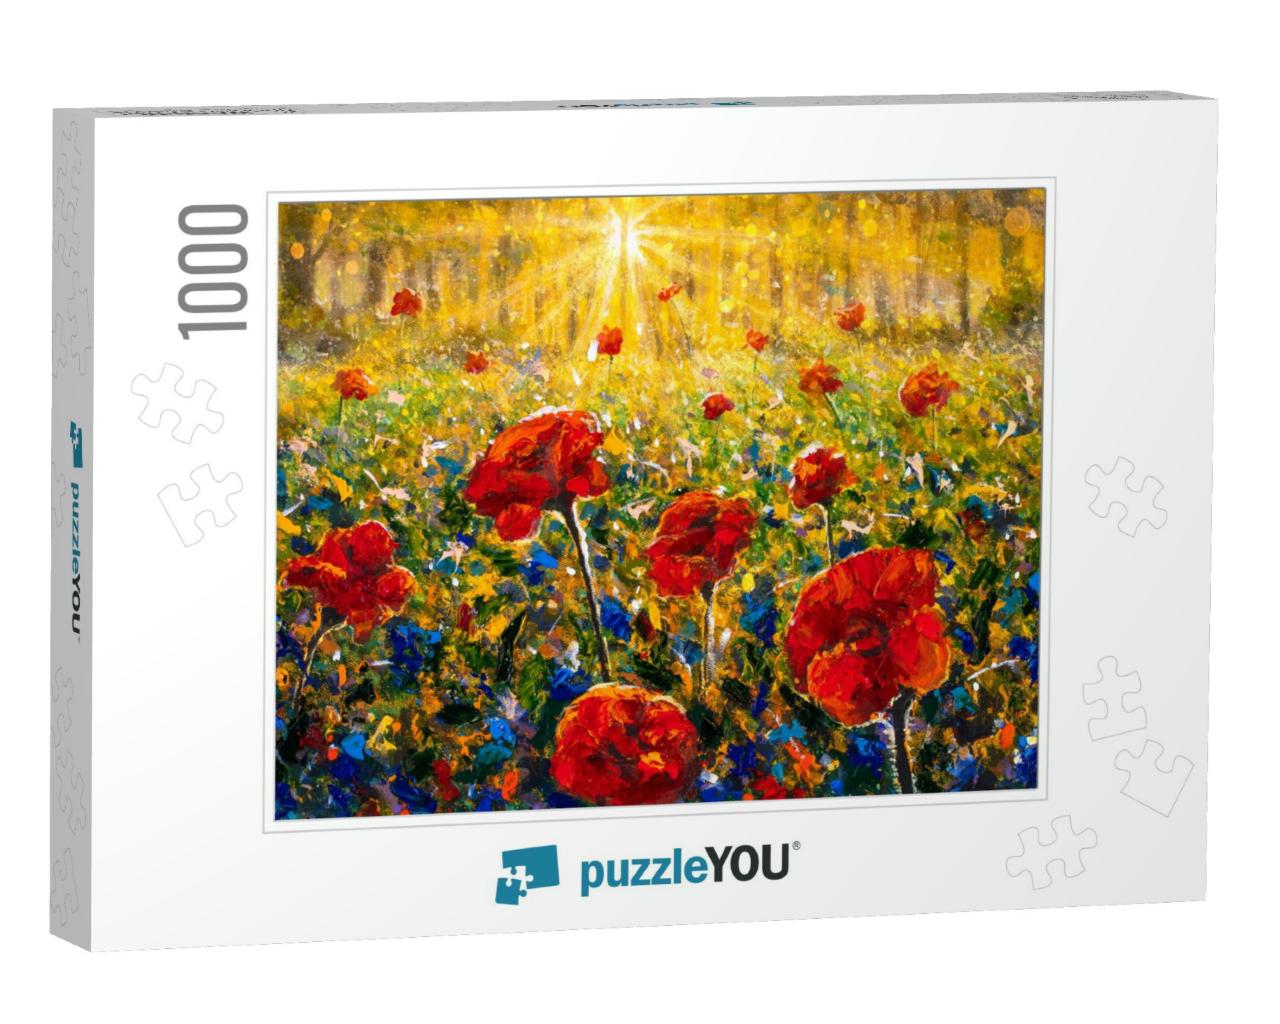 Artwork Sun Rays Sunny Flower Field Sunrise Sunset in For... Jigsaw Puzzle with 1000 pieces